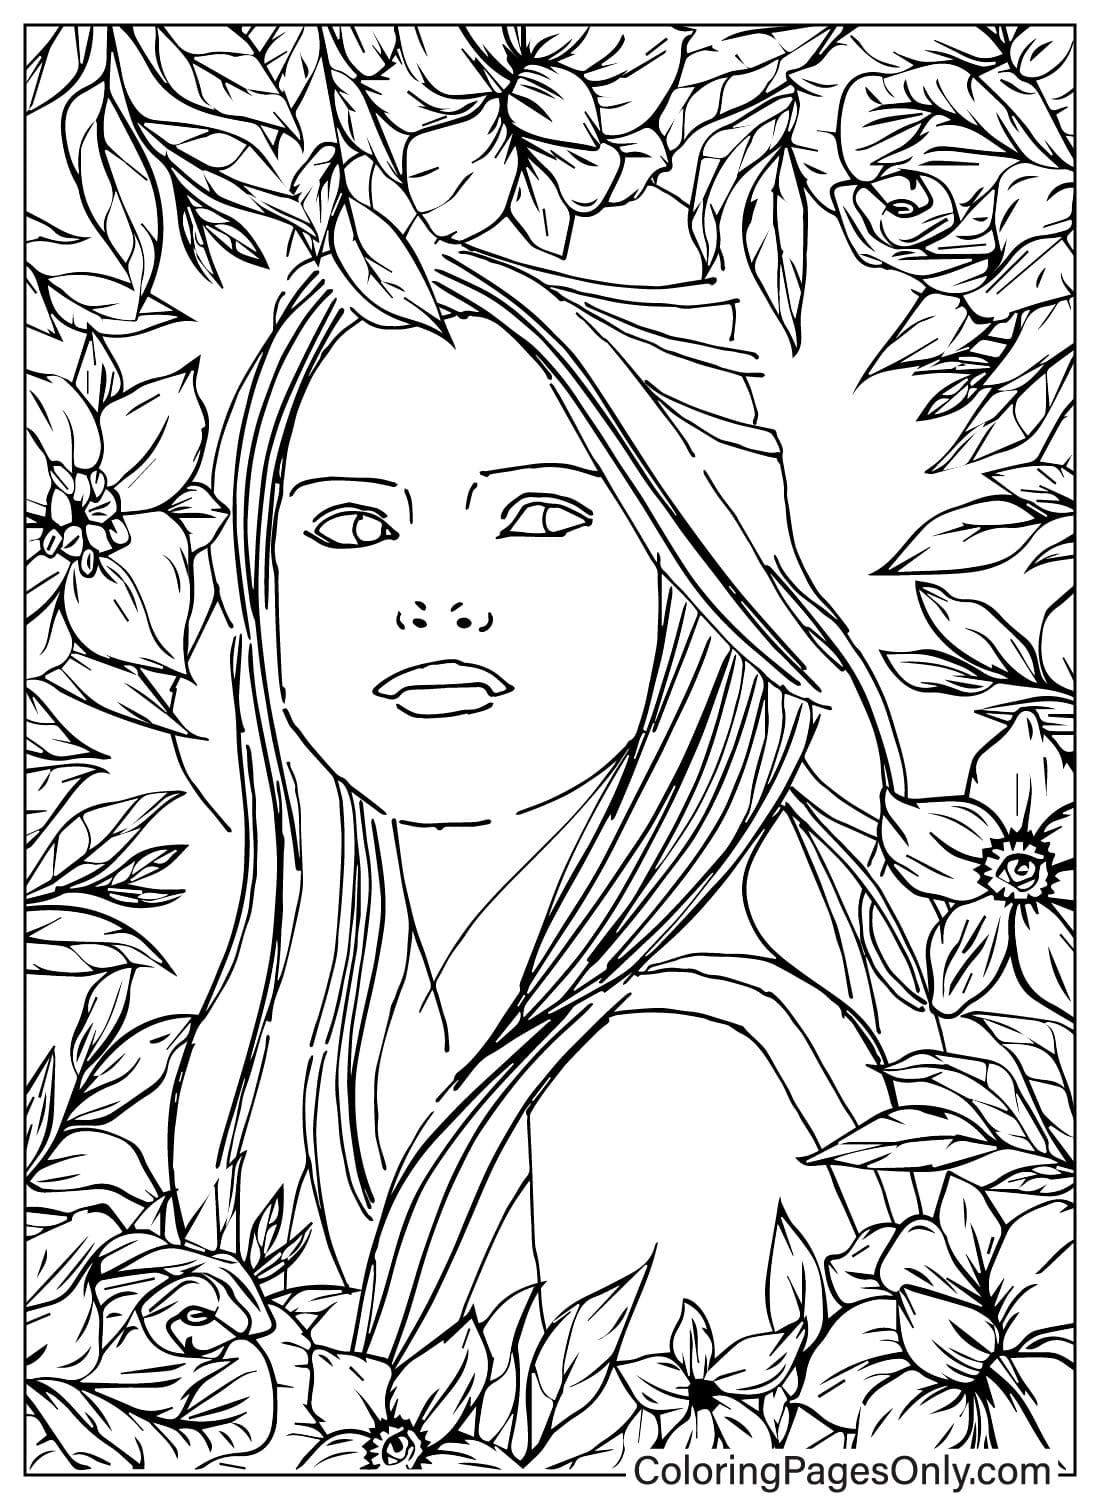 Selena Gomez and Flower Coloring Page - Free Printable Coloring Pages